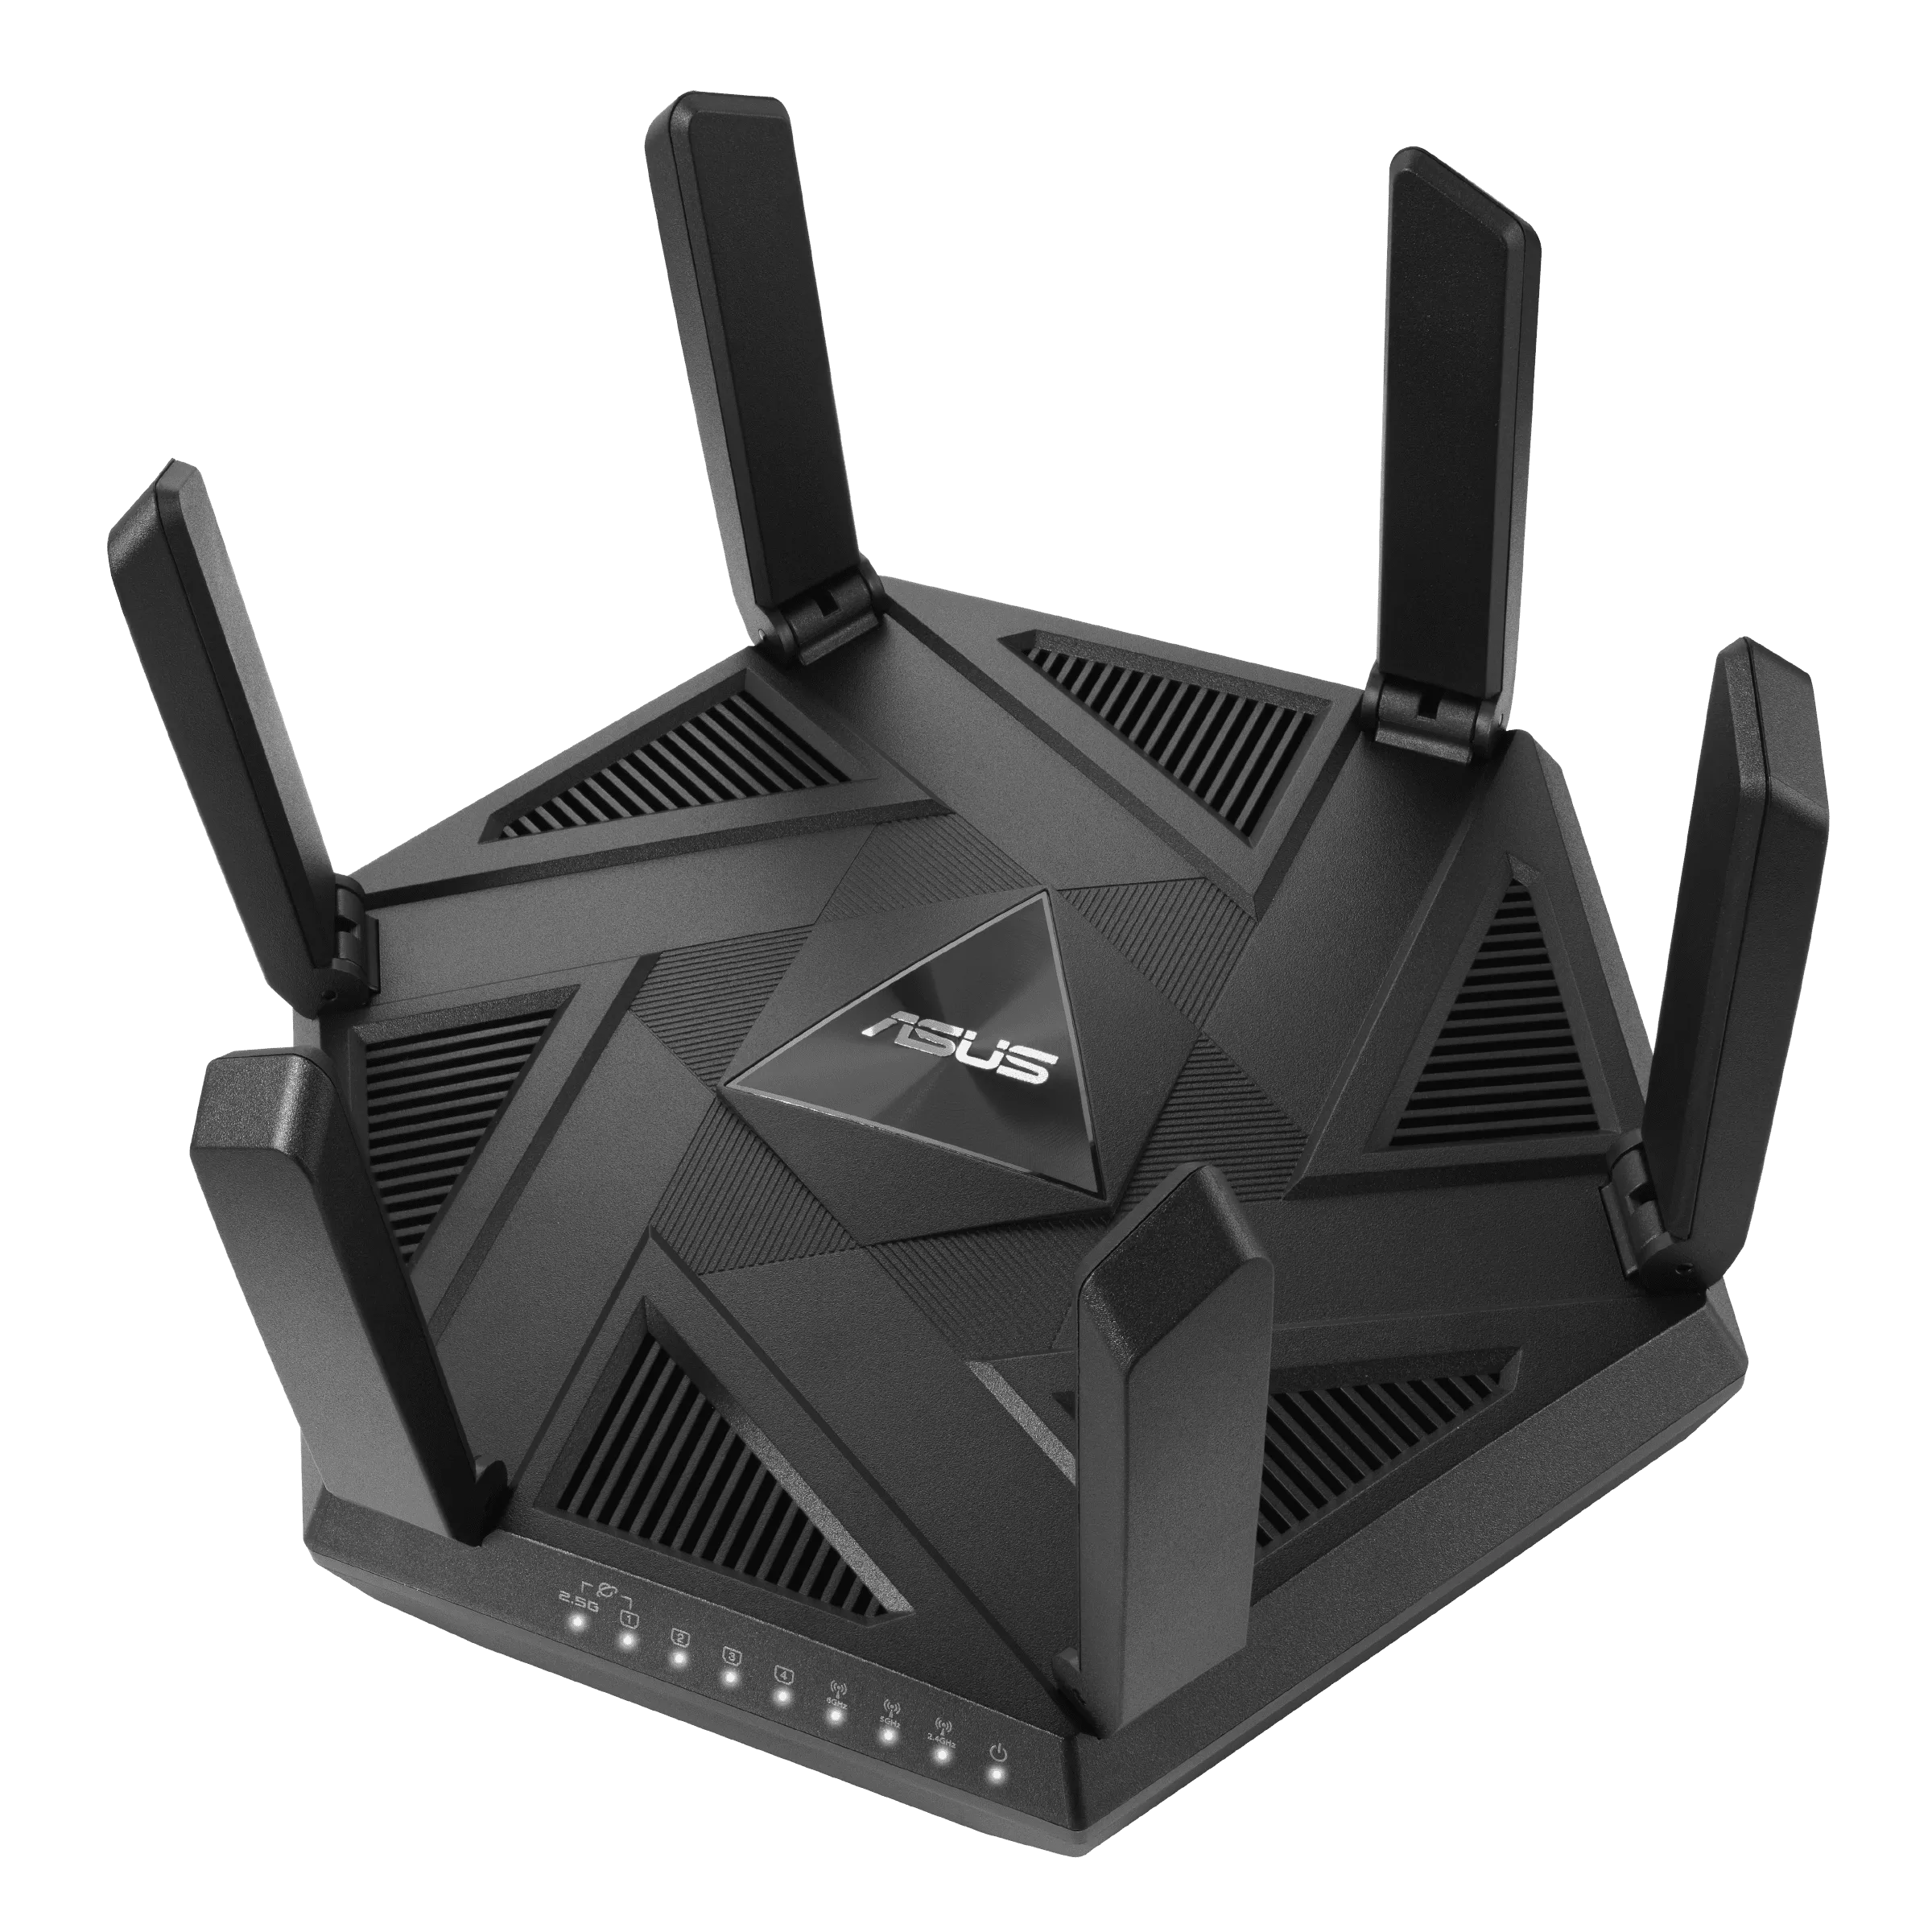 ASUS RT-AXE7800 Tri-Band WiFi 6E Router Listed on Amazon US